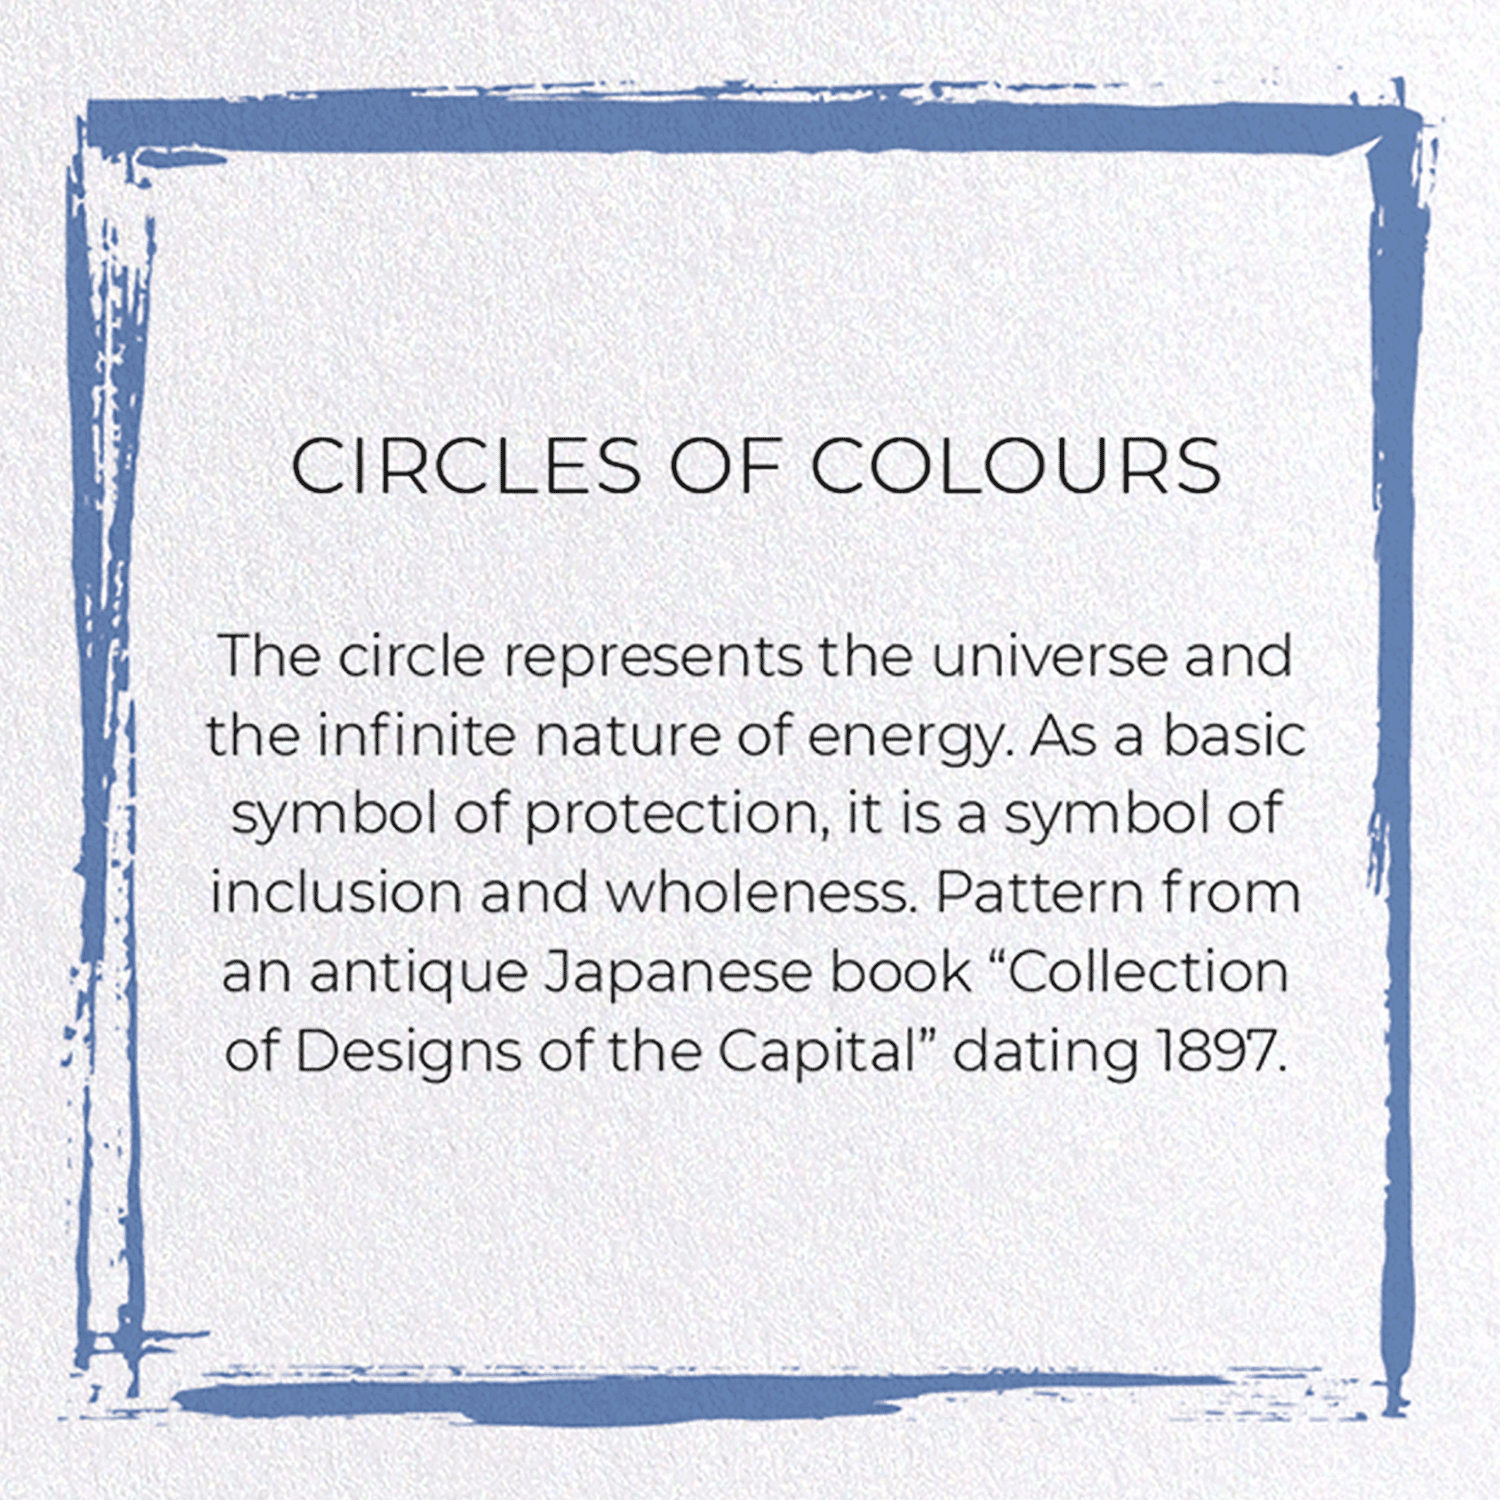 CIRCLES OF COLOURS